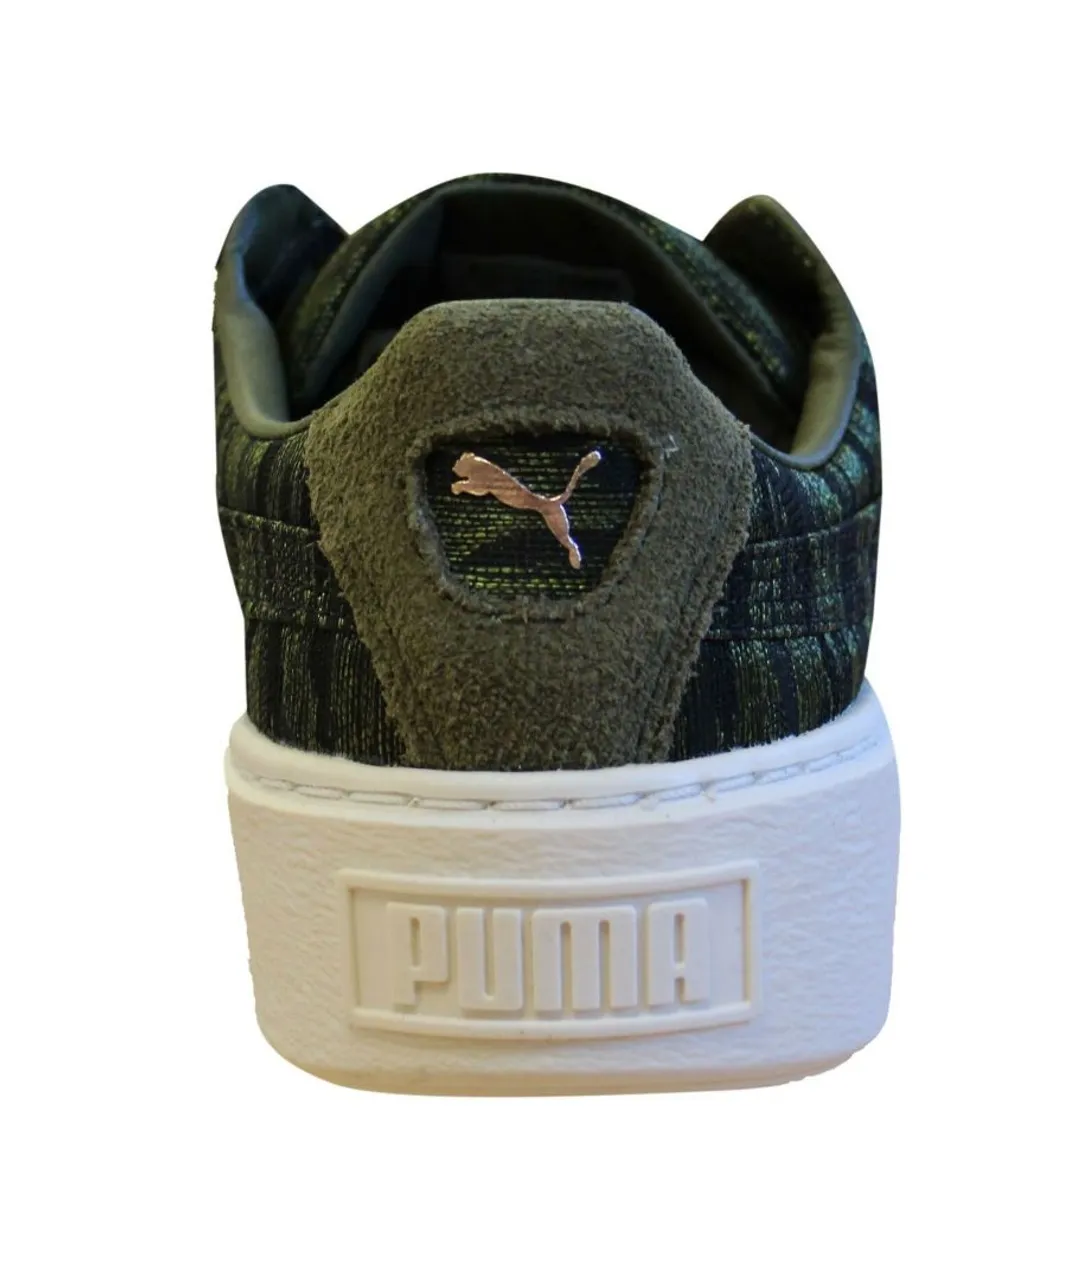 Puma Basket Platform Velvet Rope Olive Low Lace Up Womens Trainers 364092 01 - Green Leather (archived)